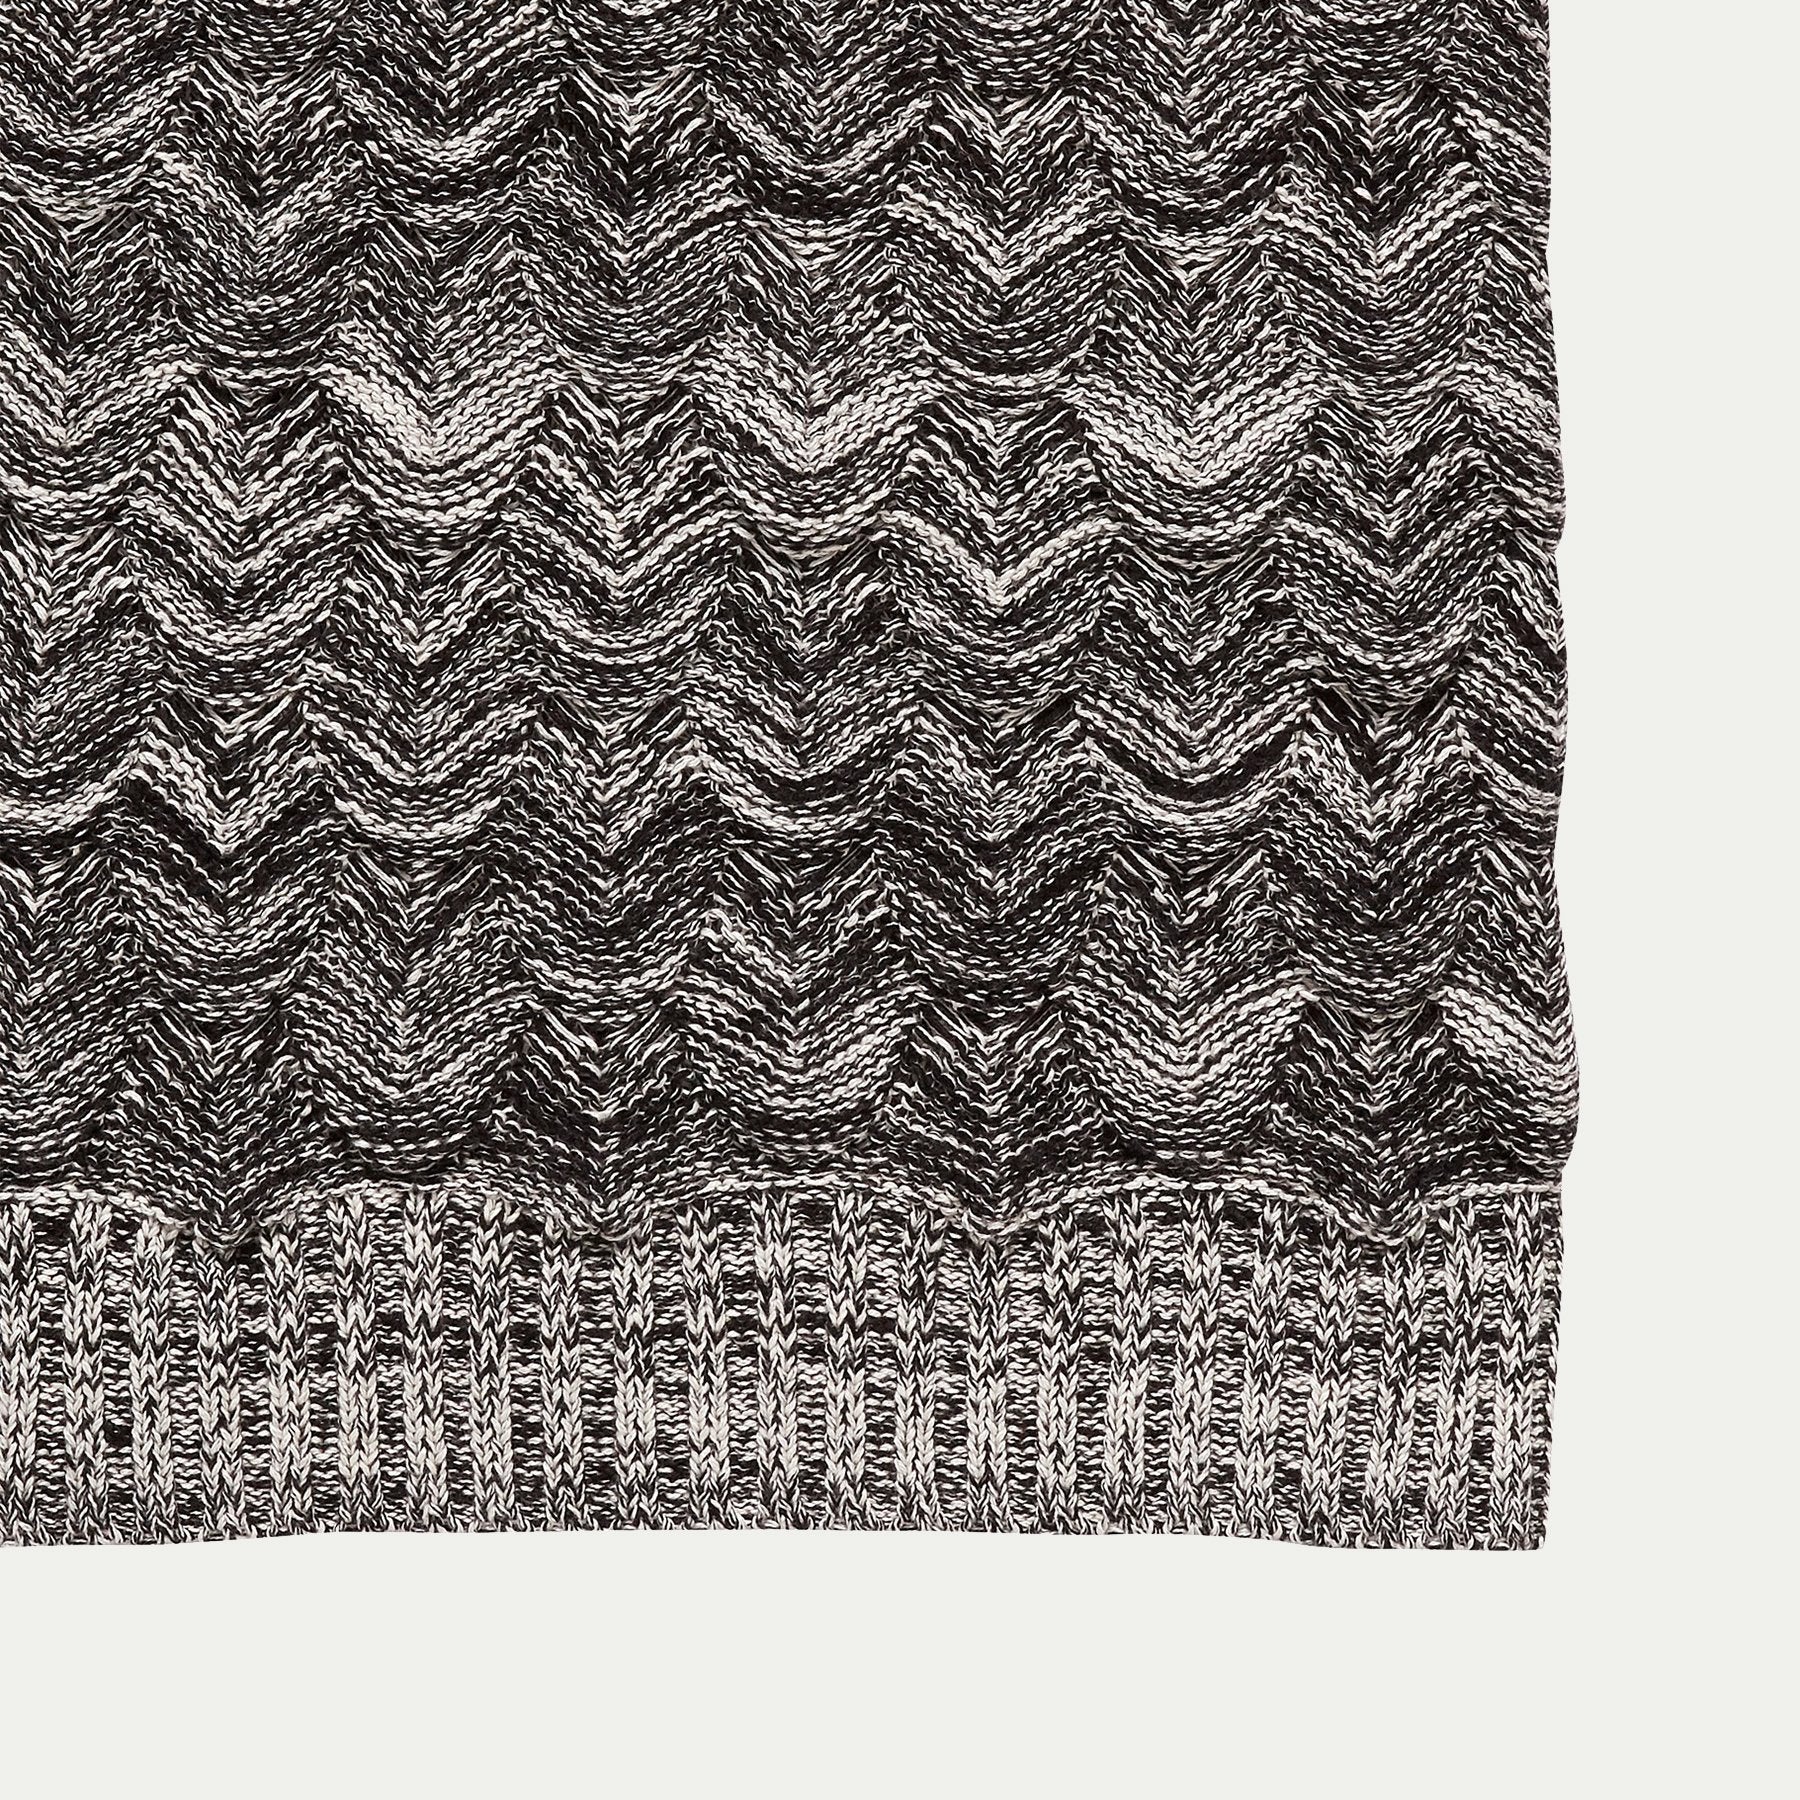 Close up of a Hubsch Interior large cotton scale knit throw blanket in charcoal grey and cream on white background